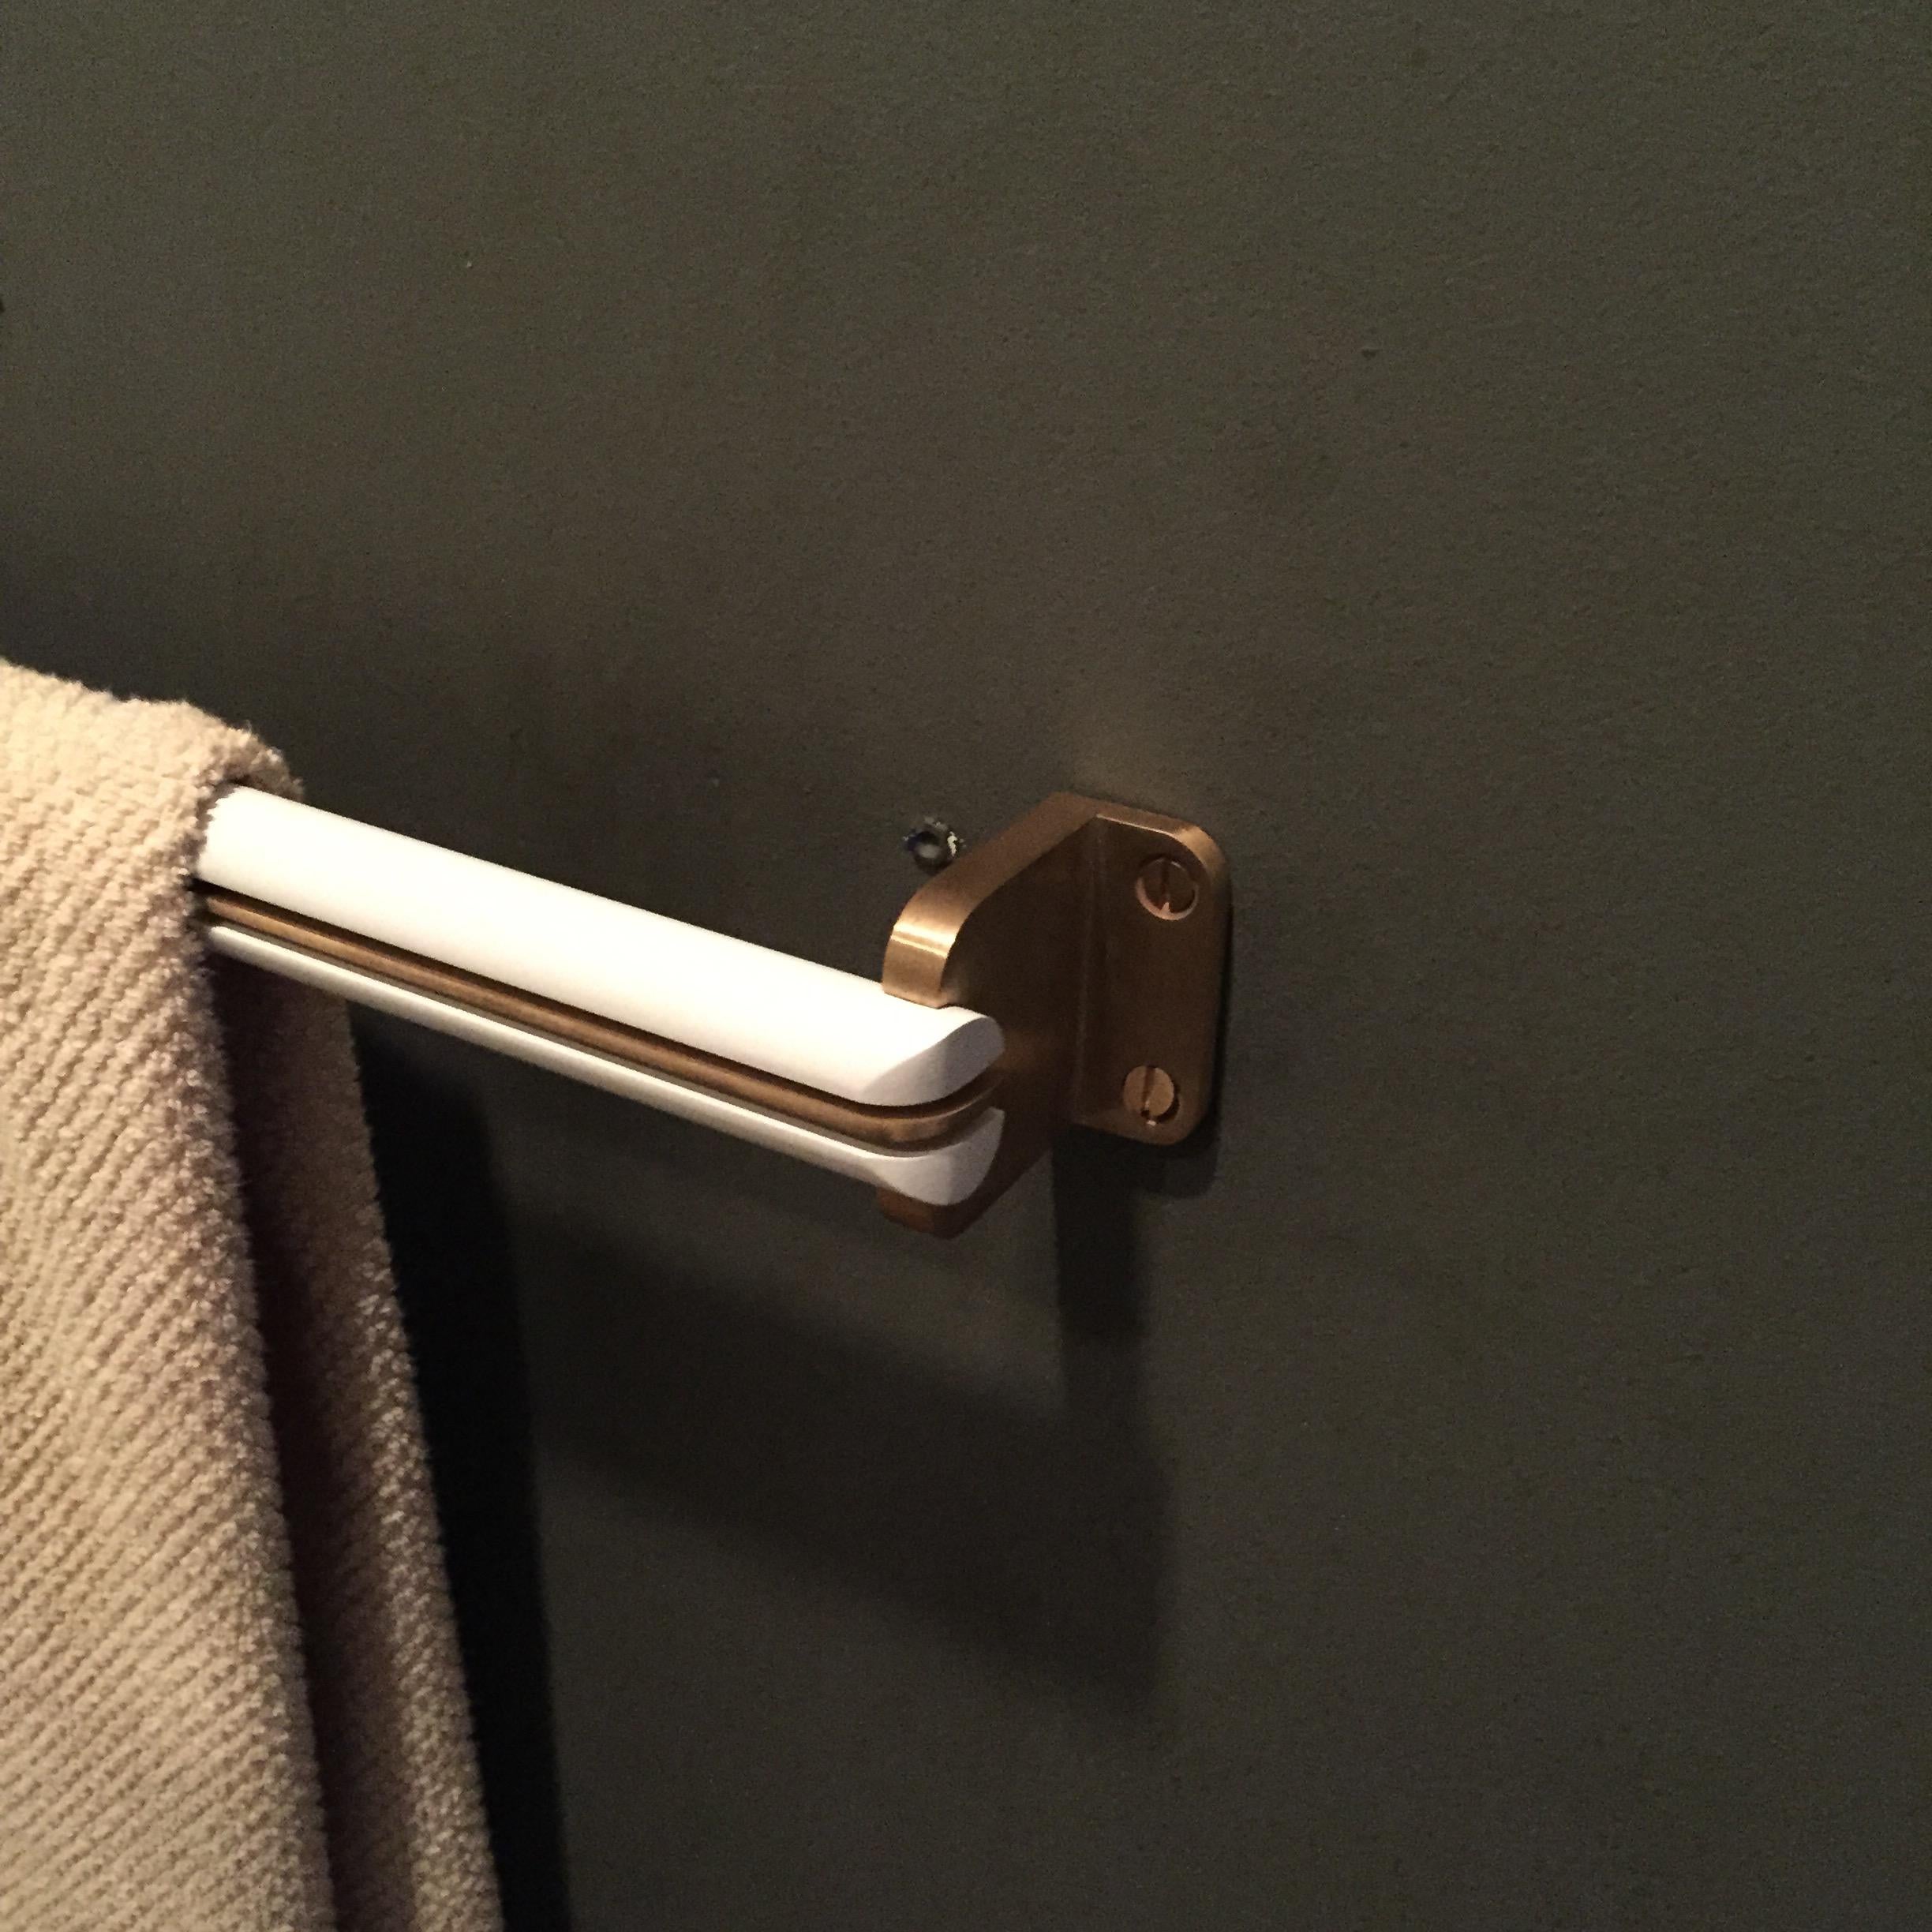 Inspired by the fittings of century-old ocean liners, the Zephyr Pull gives a nod to vintage glamour. Usable as a door pull or a towel bar.

Metal finishes: Antique bronze, oil-rubbed bronze, satin nickel, satin brass, polished brass, or